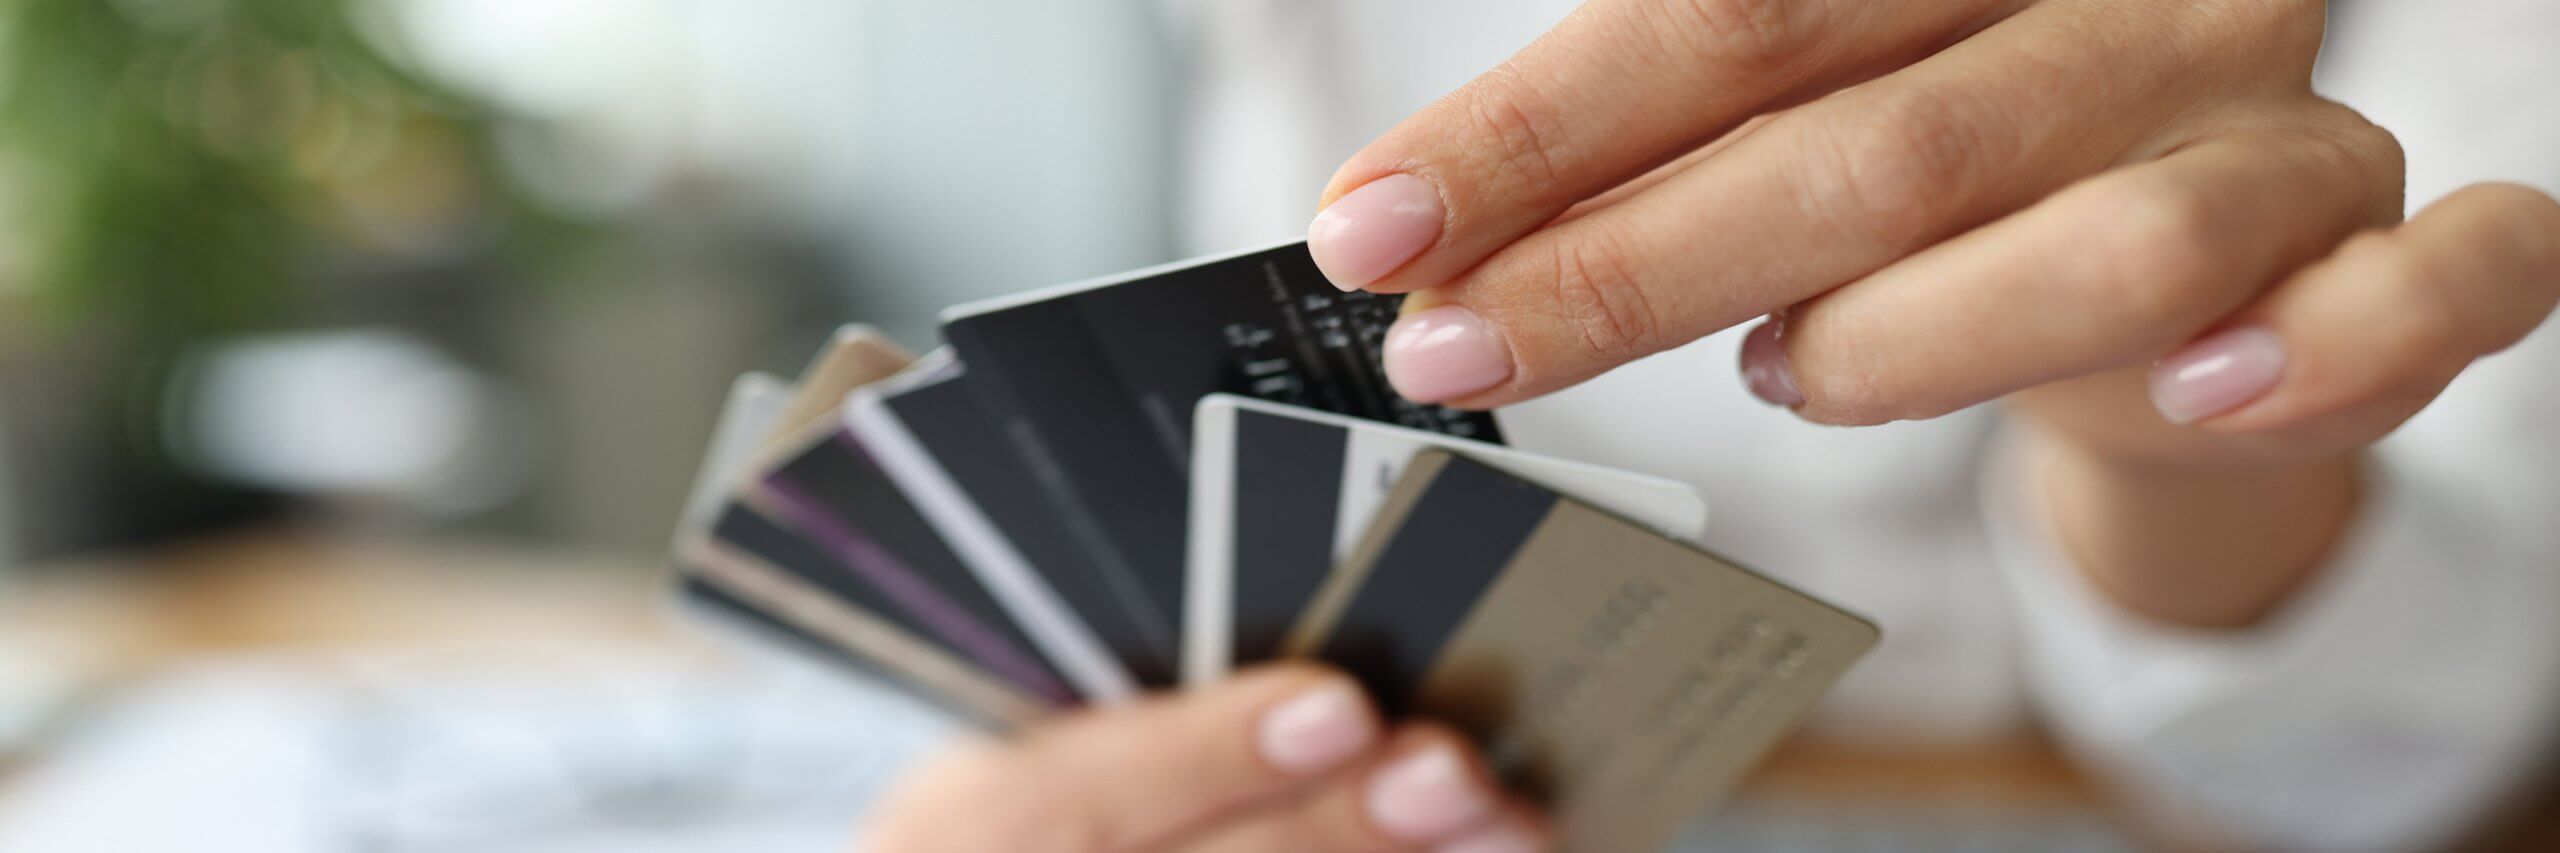 Is It Ok to Use a Personal Credit Card for My Business Expenses?